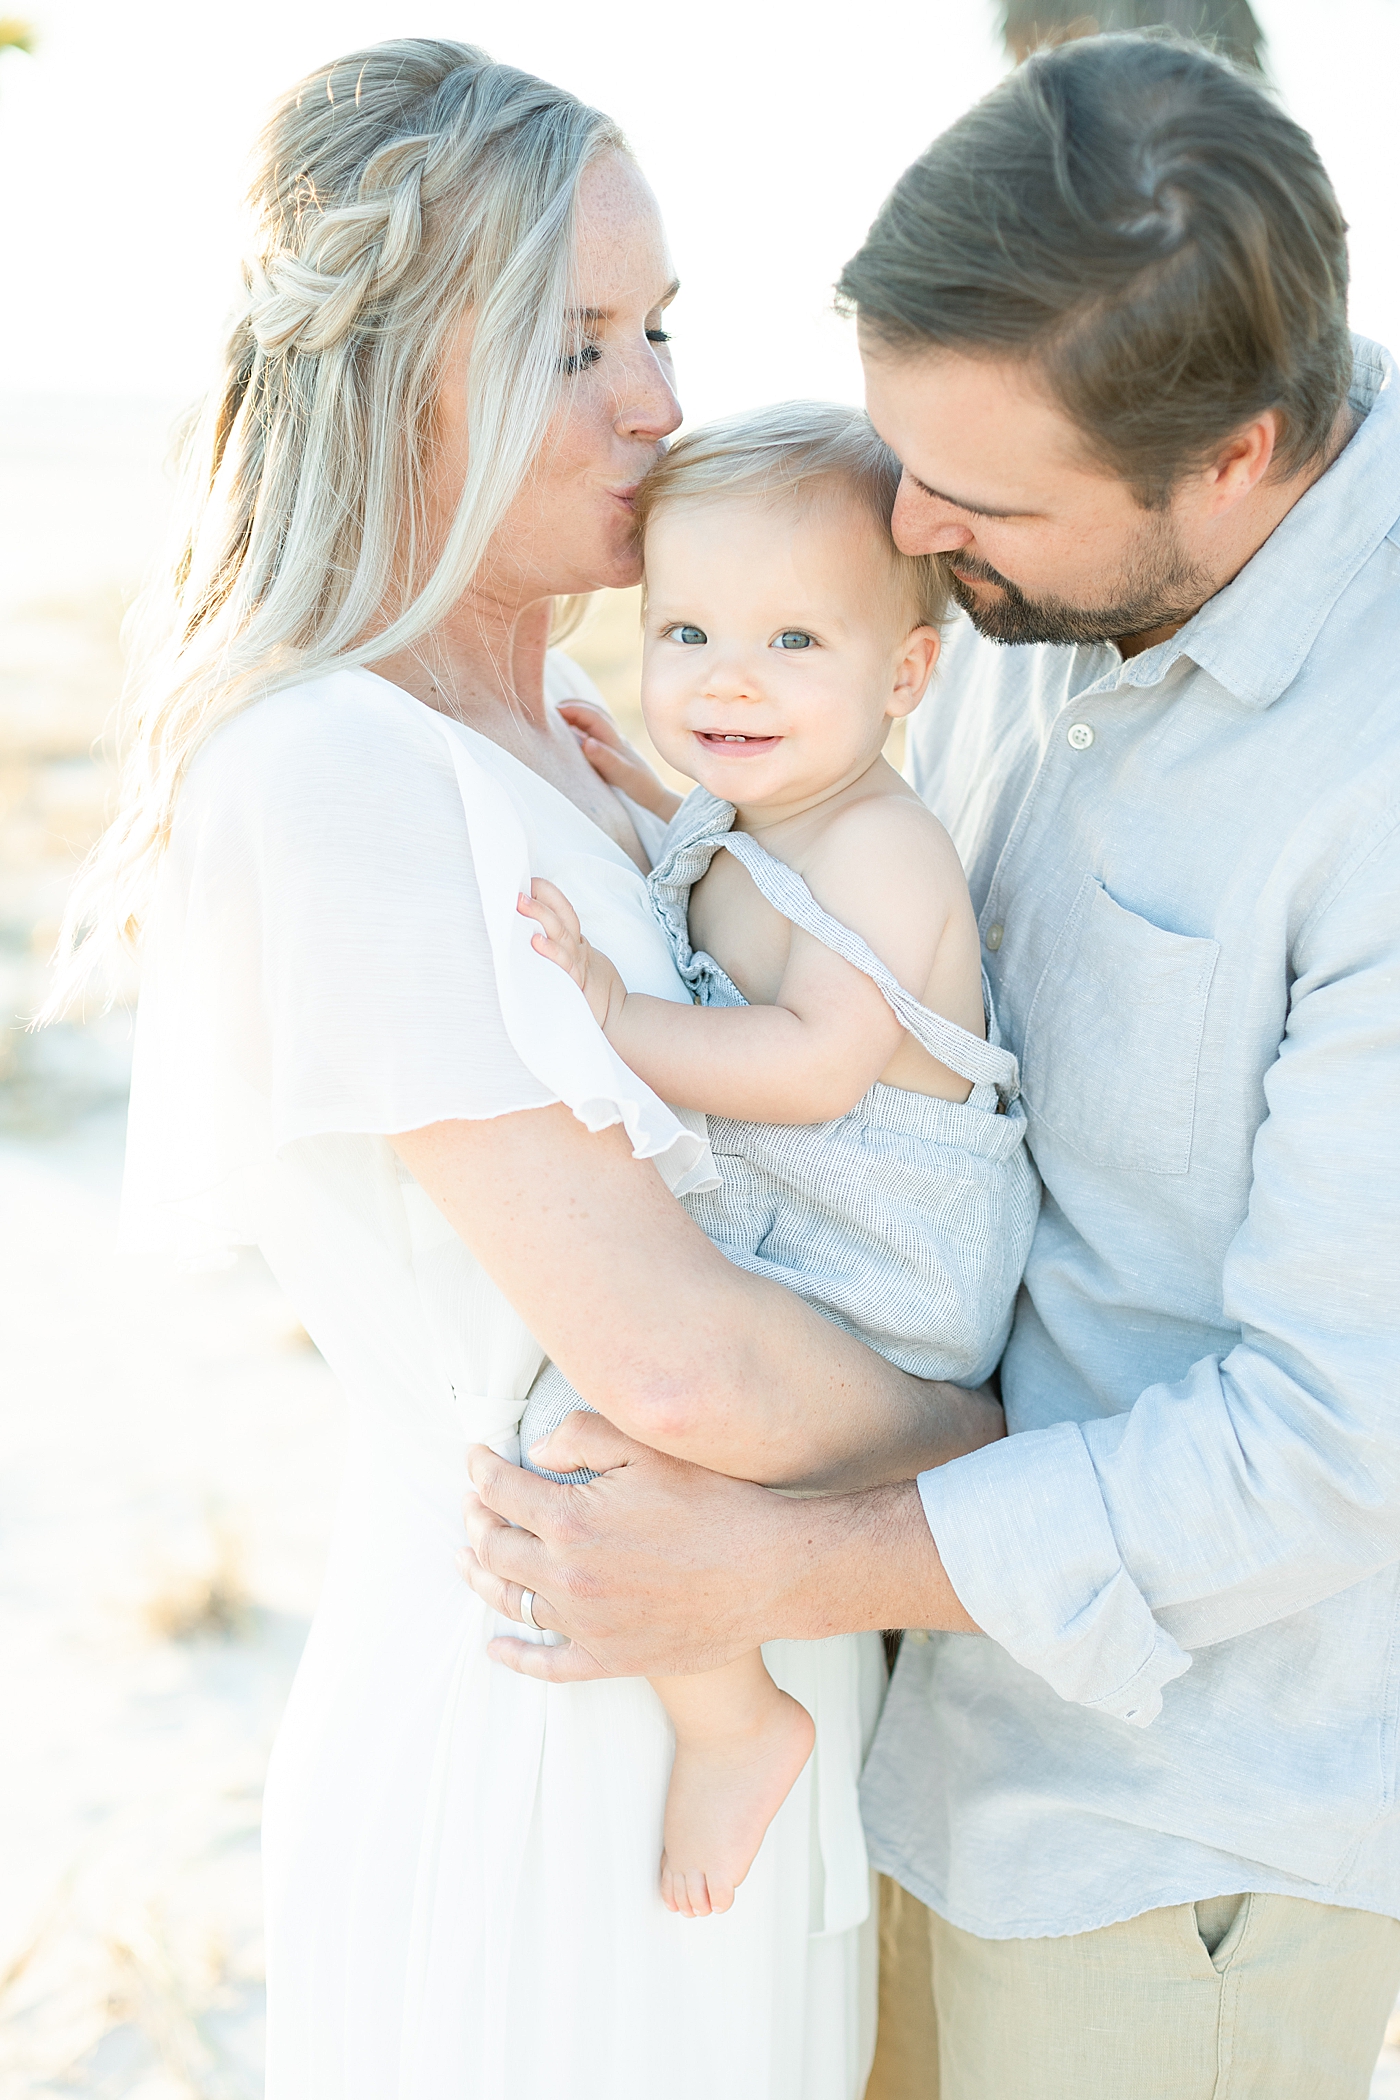 Mom and Dad kissing their son. Photo by Little Sunshine Photography.